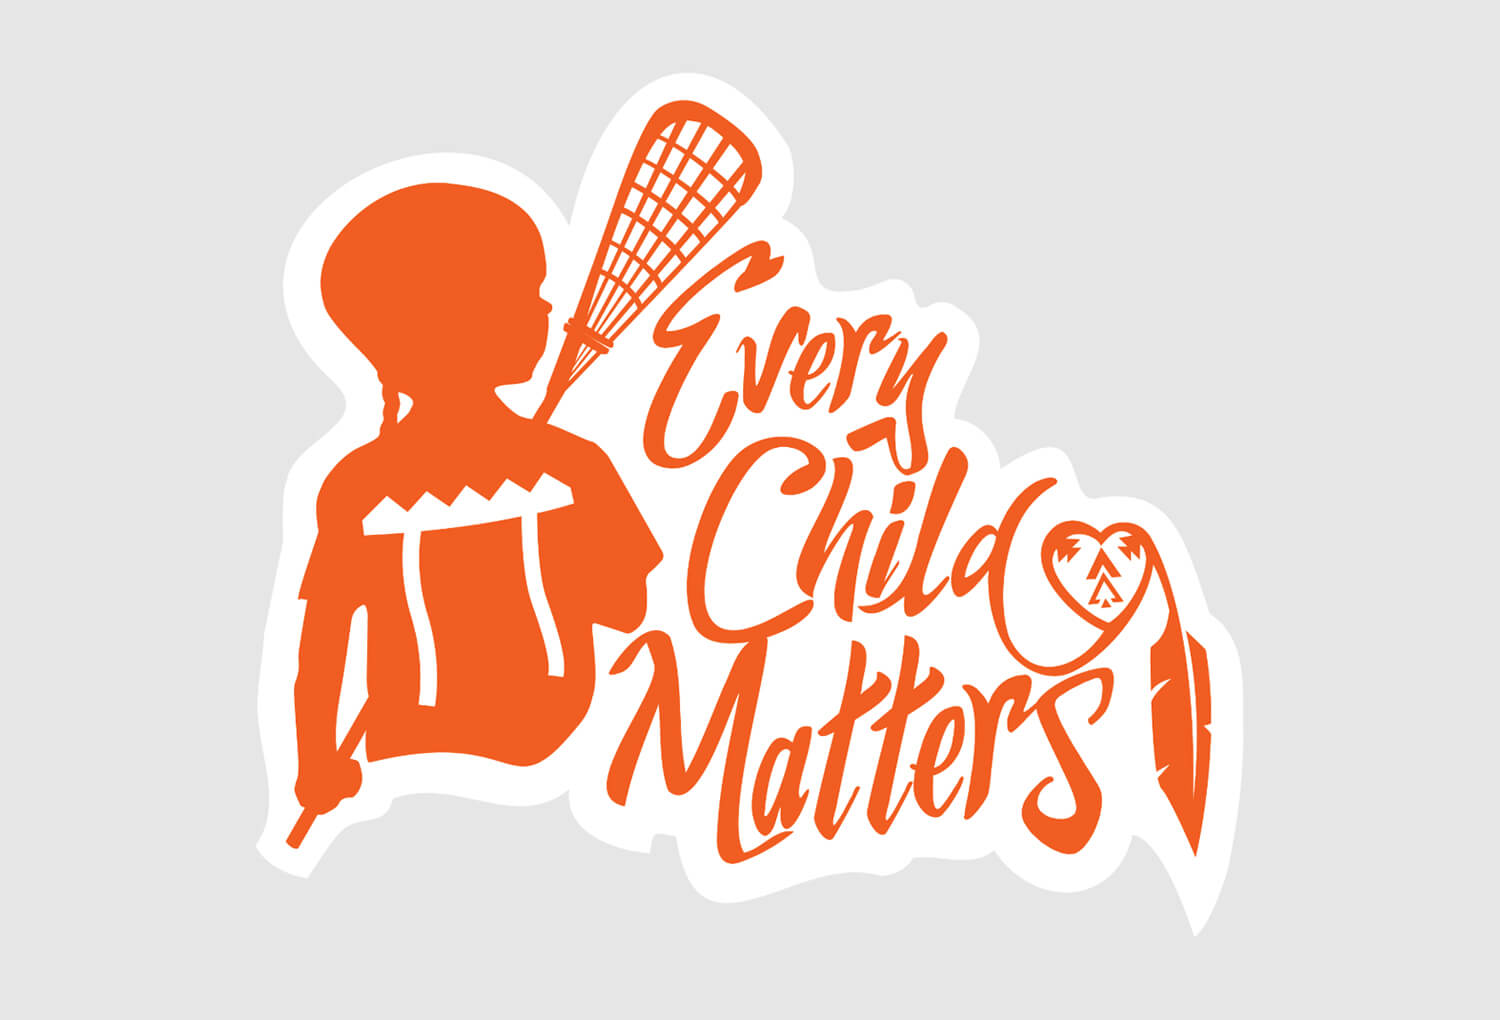 nll-every-child-matters